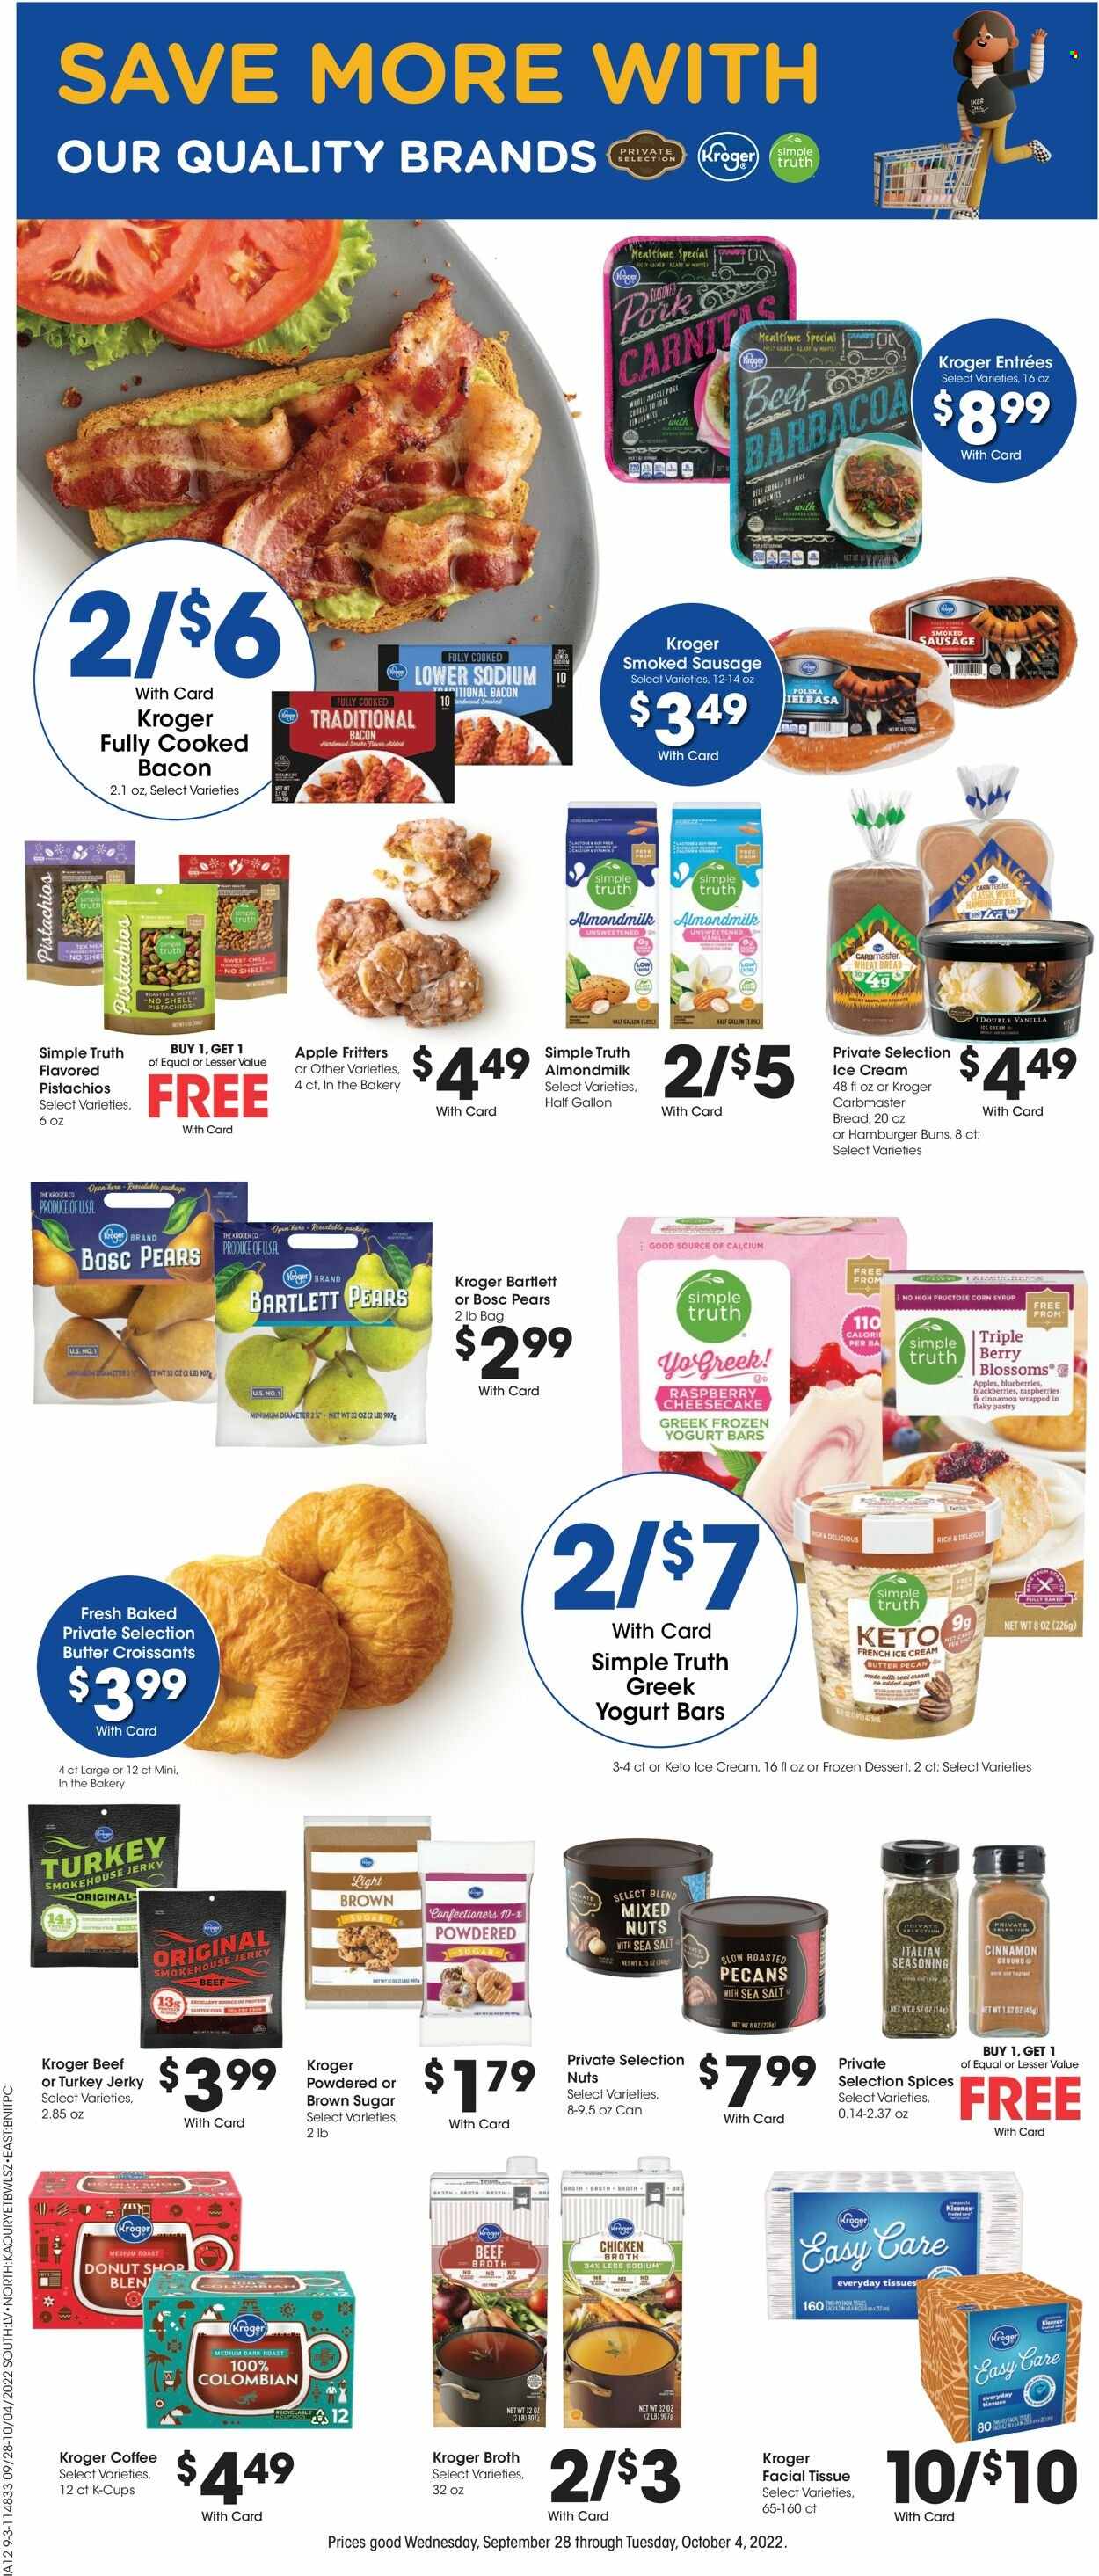 thumbnail - Fred Meyer Flyer - 09/28/2022 - 10/04/2022 - Sales products - wheat bread, croissant, buns, burger buns, corn, apples, Bartlett pears, blackberries, blueberries, pears, bacon, jerky, sausage, smoked sausage, greek yoghurt, almond milk, ice cream, Enlightened lce Cream, beef broth, chicken broth, icing sugar, broth, spice, cinnamon, corn syrup, syrup, pecans, pistachios, mixed nuts, coffee, coffee capsules, K-Cups, Kleenex, tissues, Shell. Page 8.